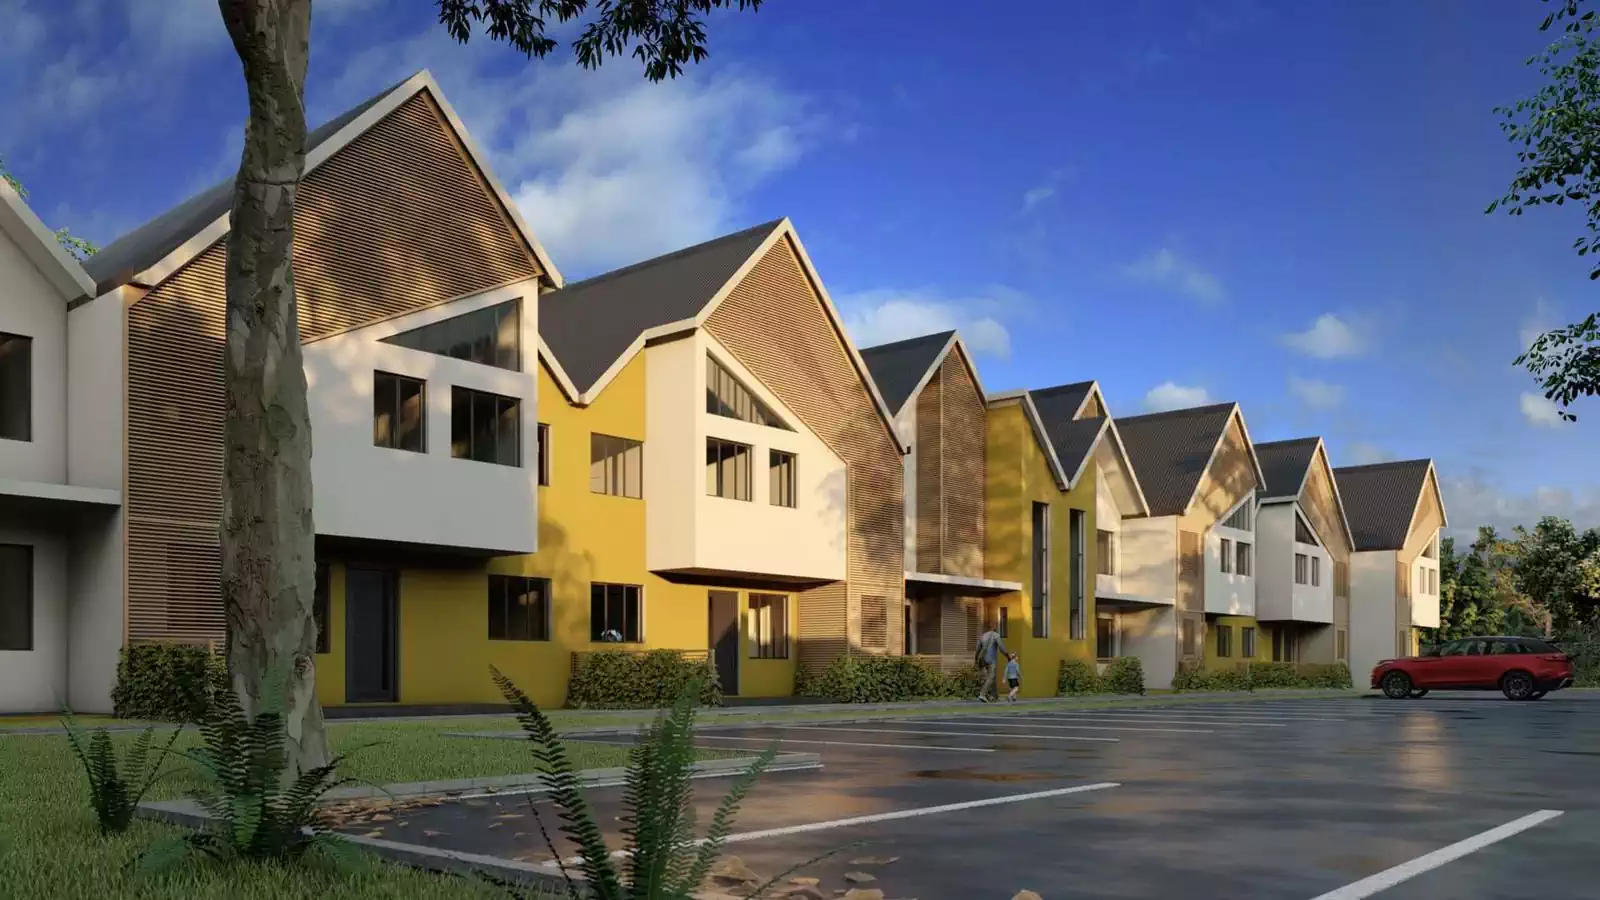 Modern townhome designs. Duplex houses in a row, wood cladding and triangular windows